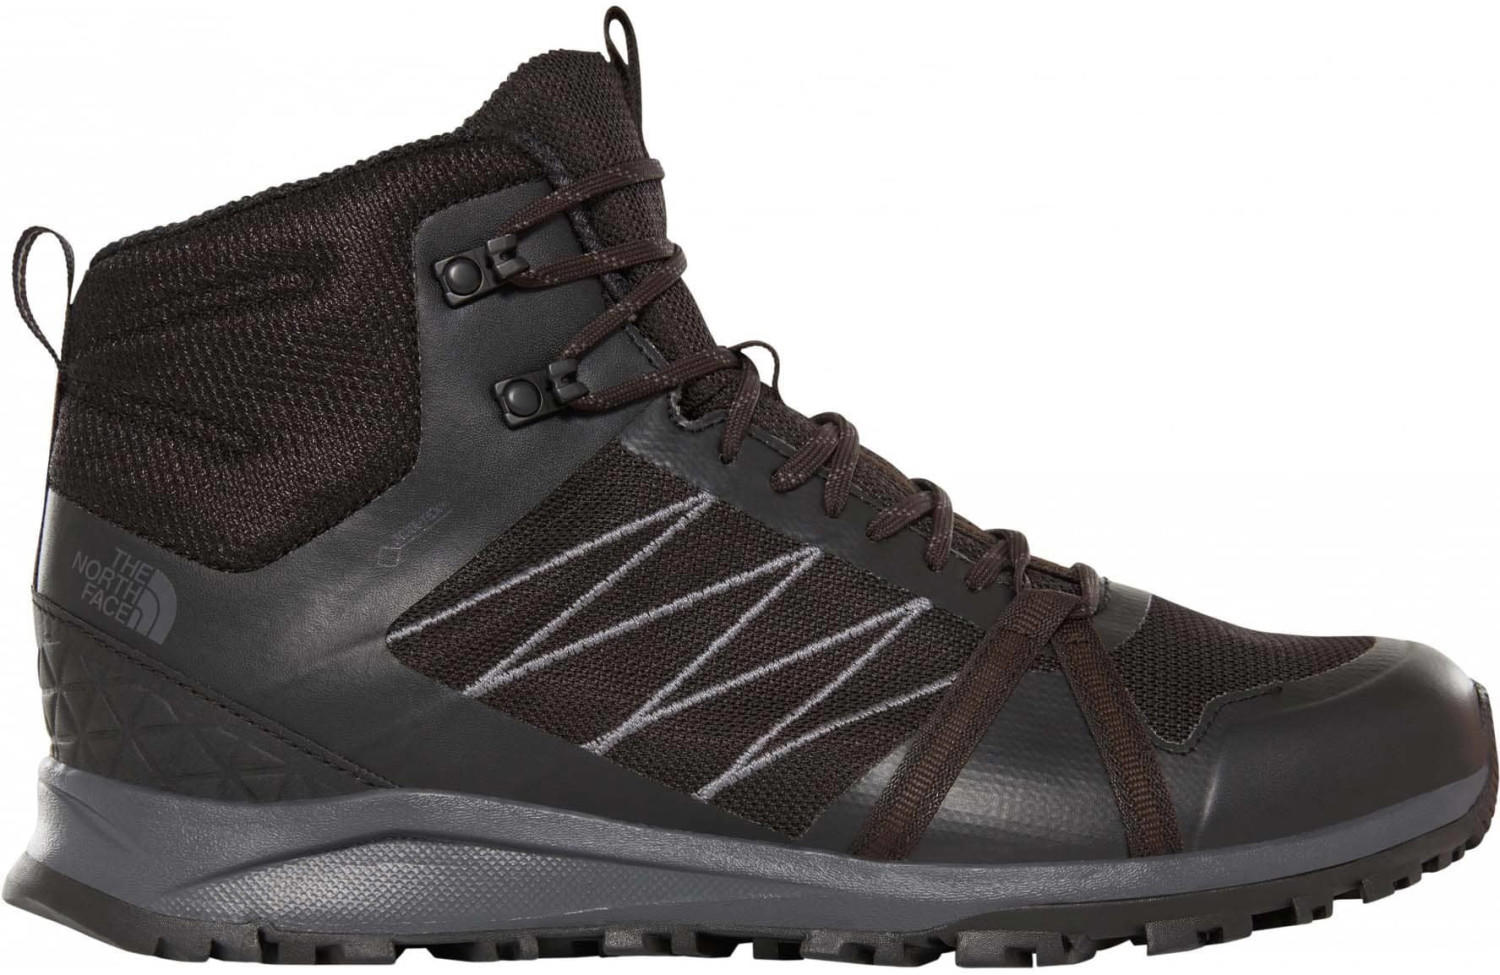 The North Face Litewave Fastpack II Mid GTX